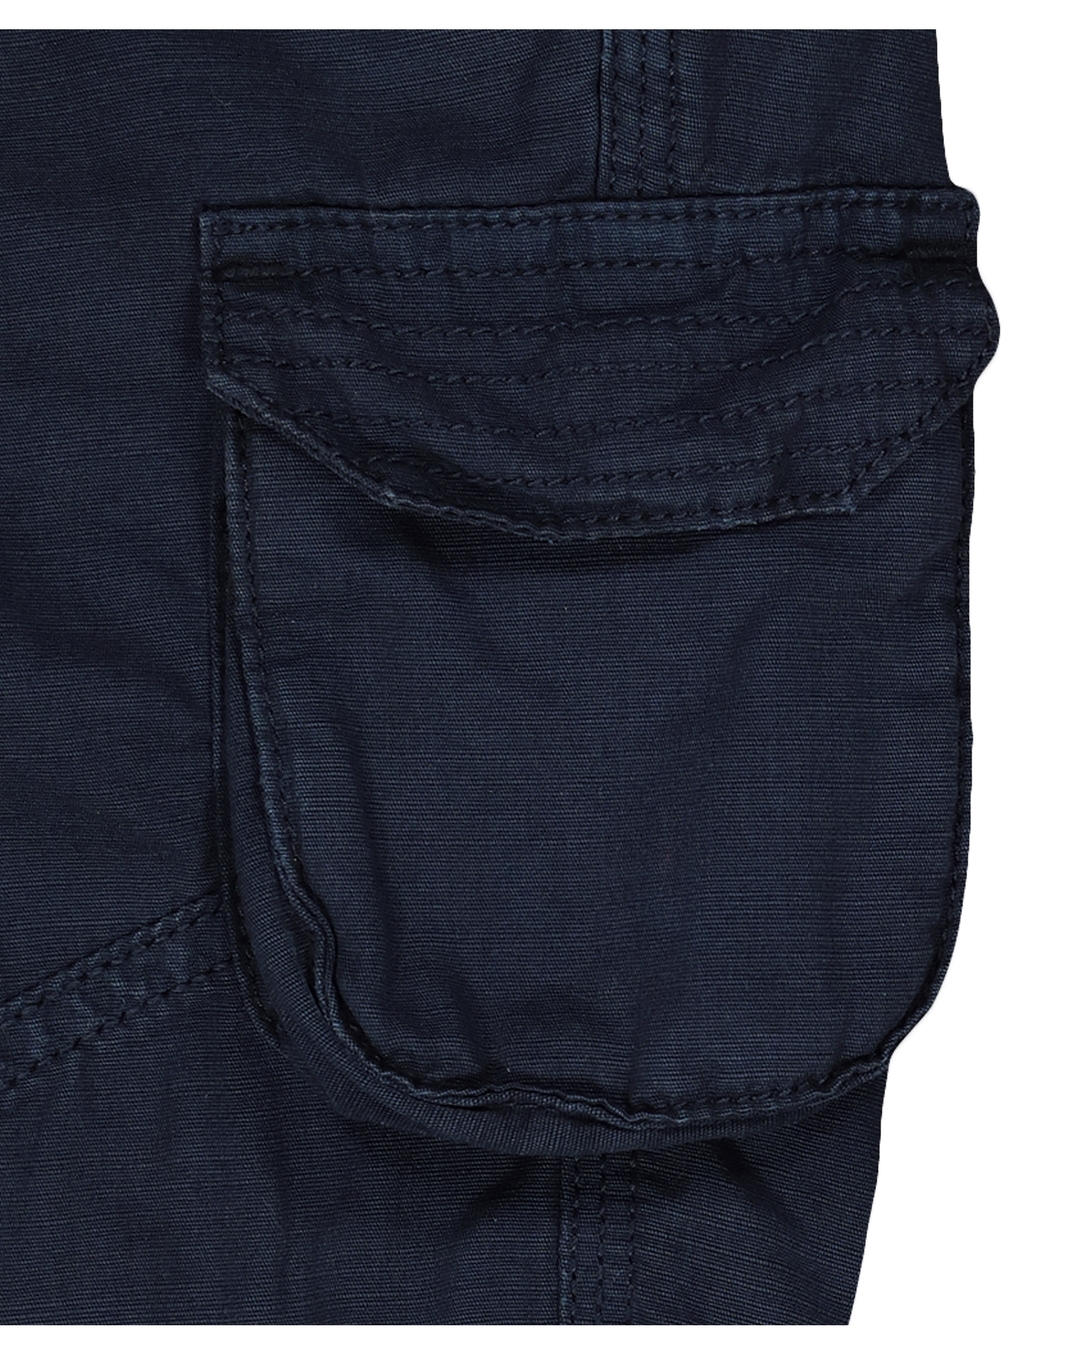 Buy Boys Trousers Fleece Lined - Navy Online at Best Price | Mothercare  India